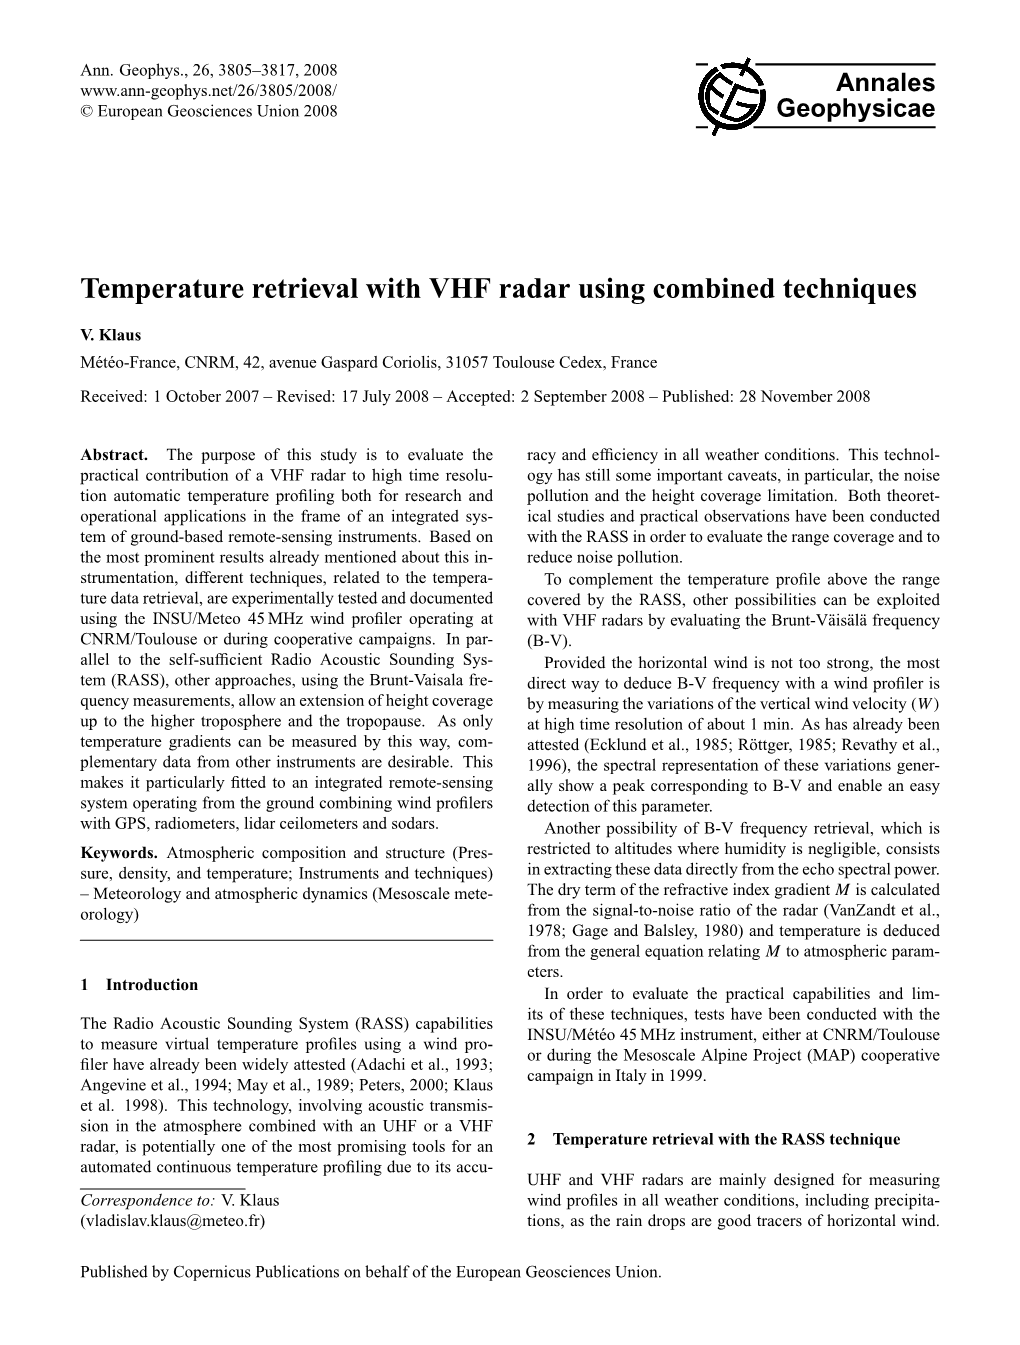 Temperature Retrieval with VHF Radar Using Combined Techniques